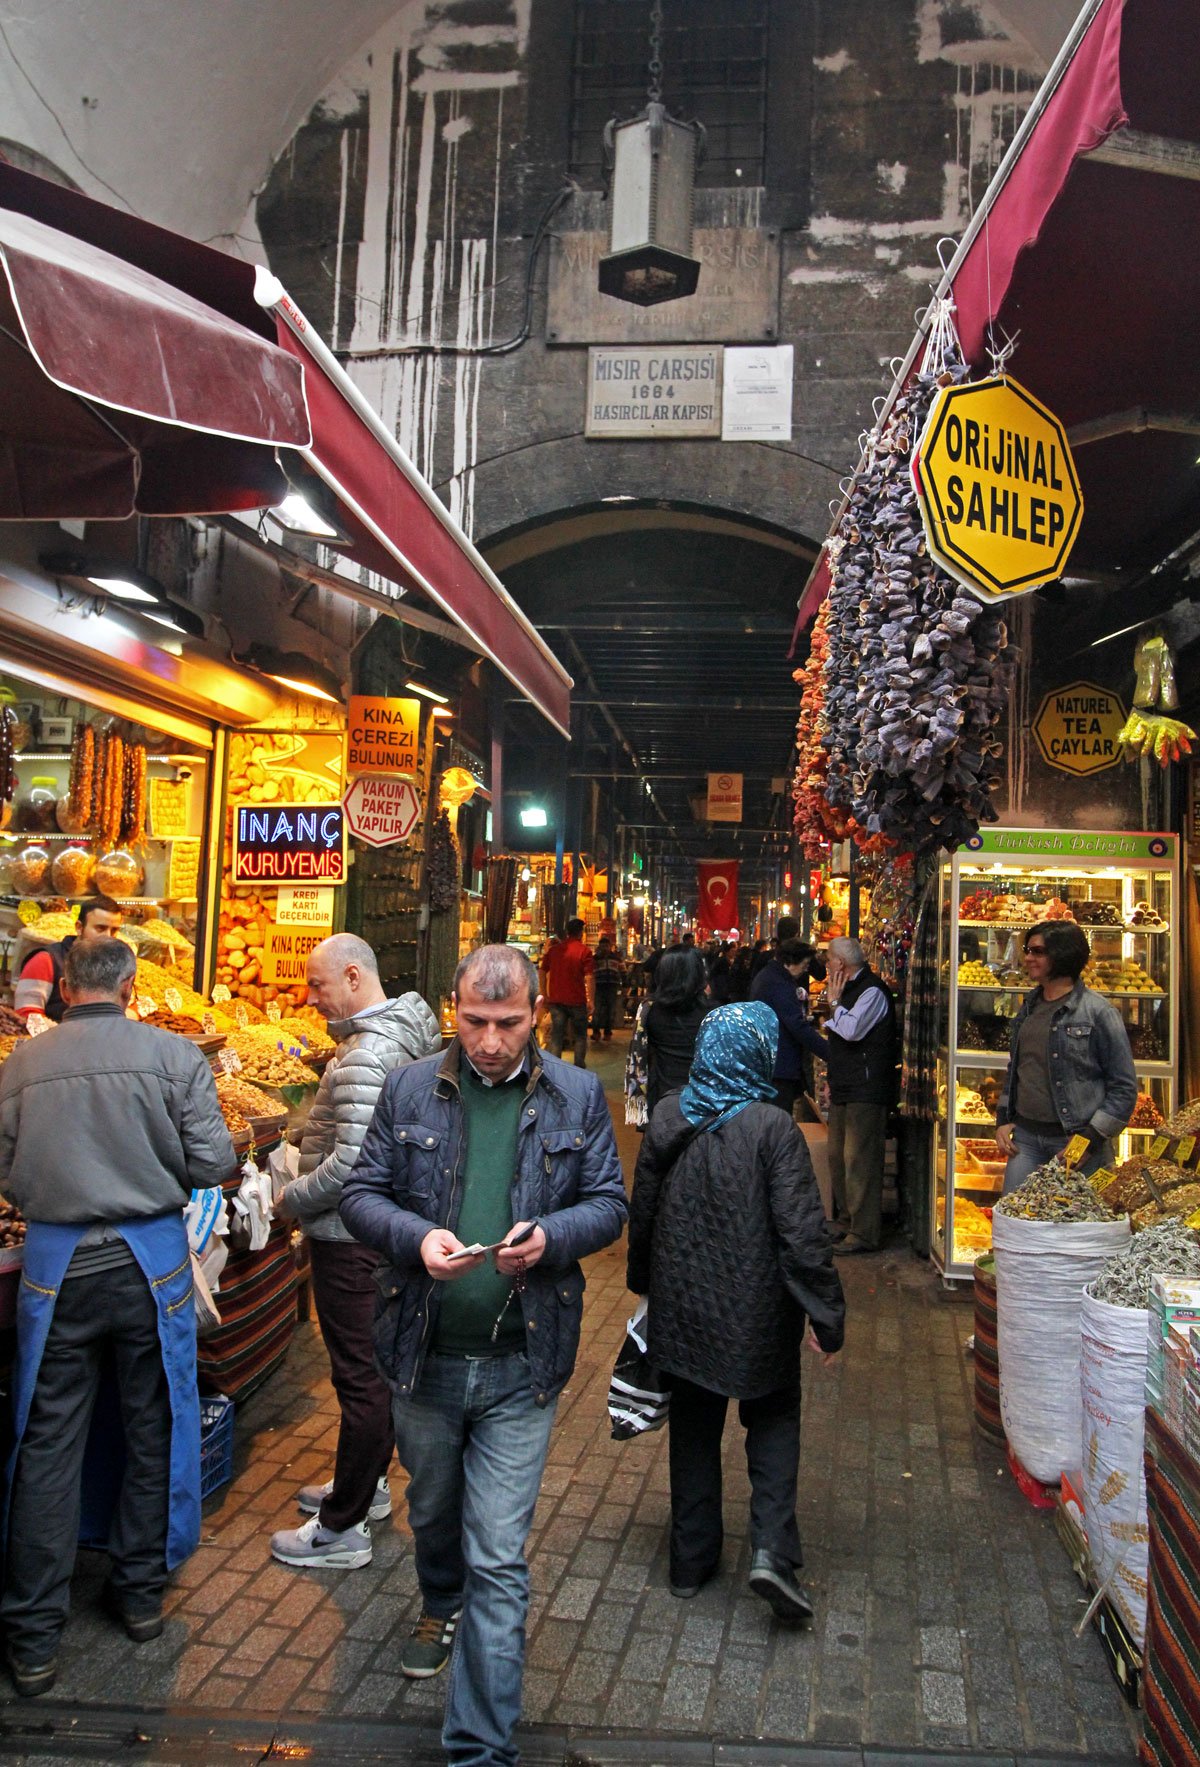 The Grand and Egyptian Spice Bazaars and Rustem Pasha Mosque in Istanbul, Turkey